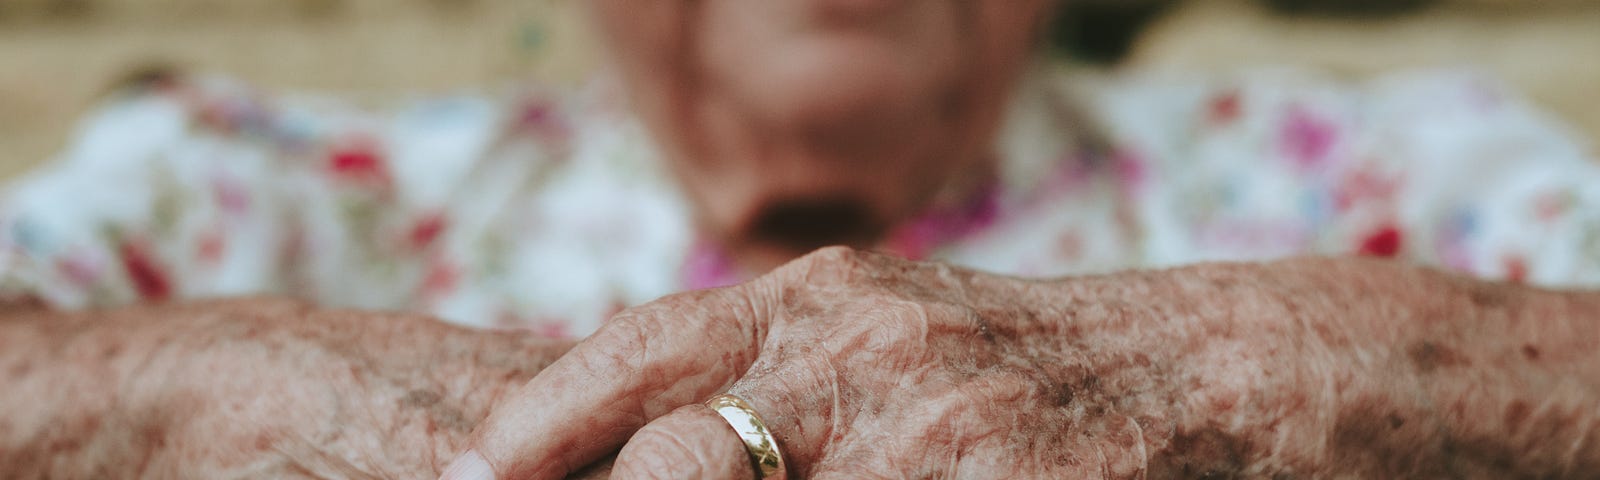 The hands of an elderly woman reveal wrinkled skin and a wedding band.